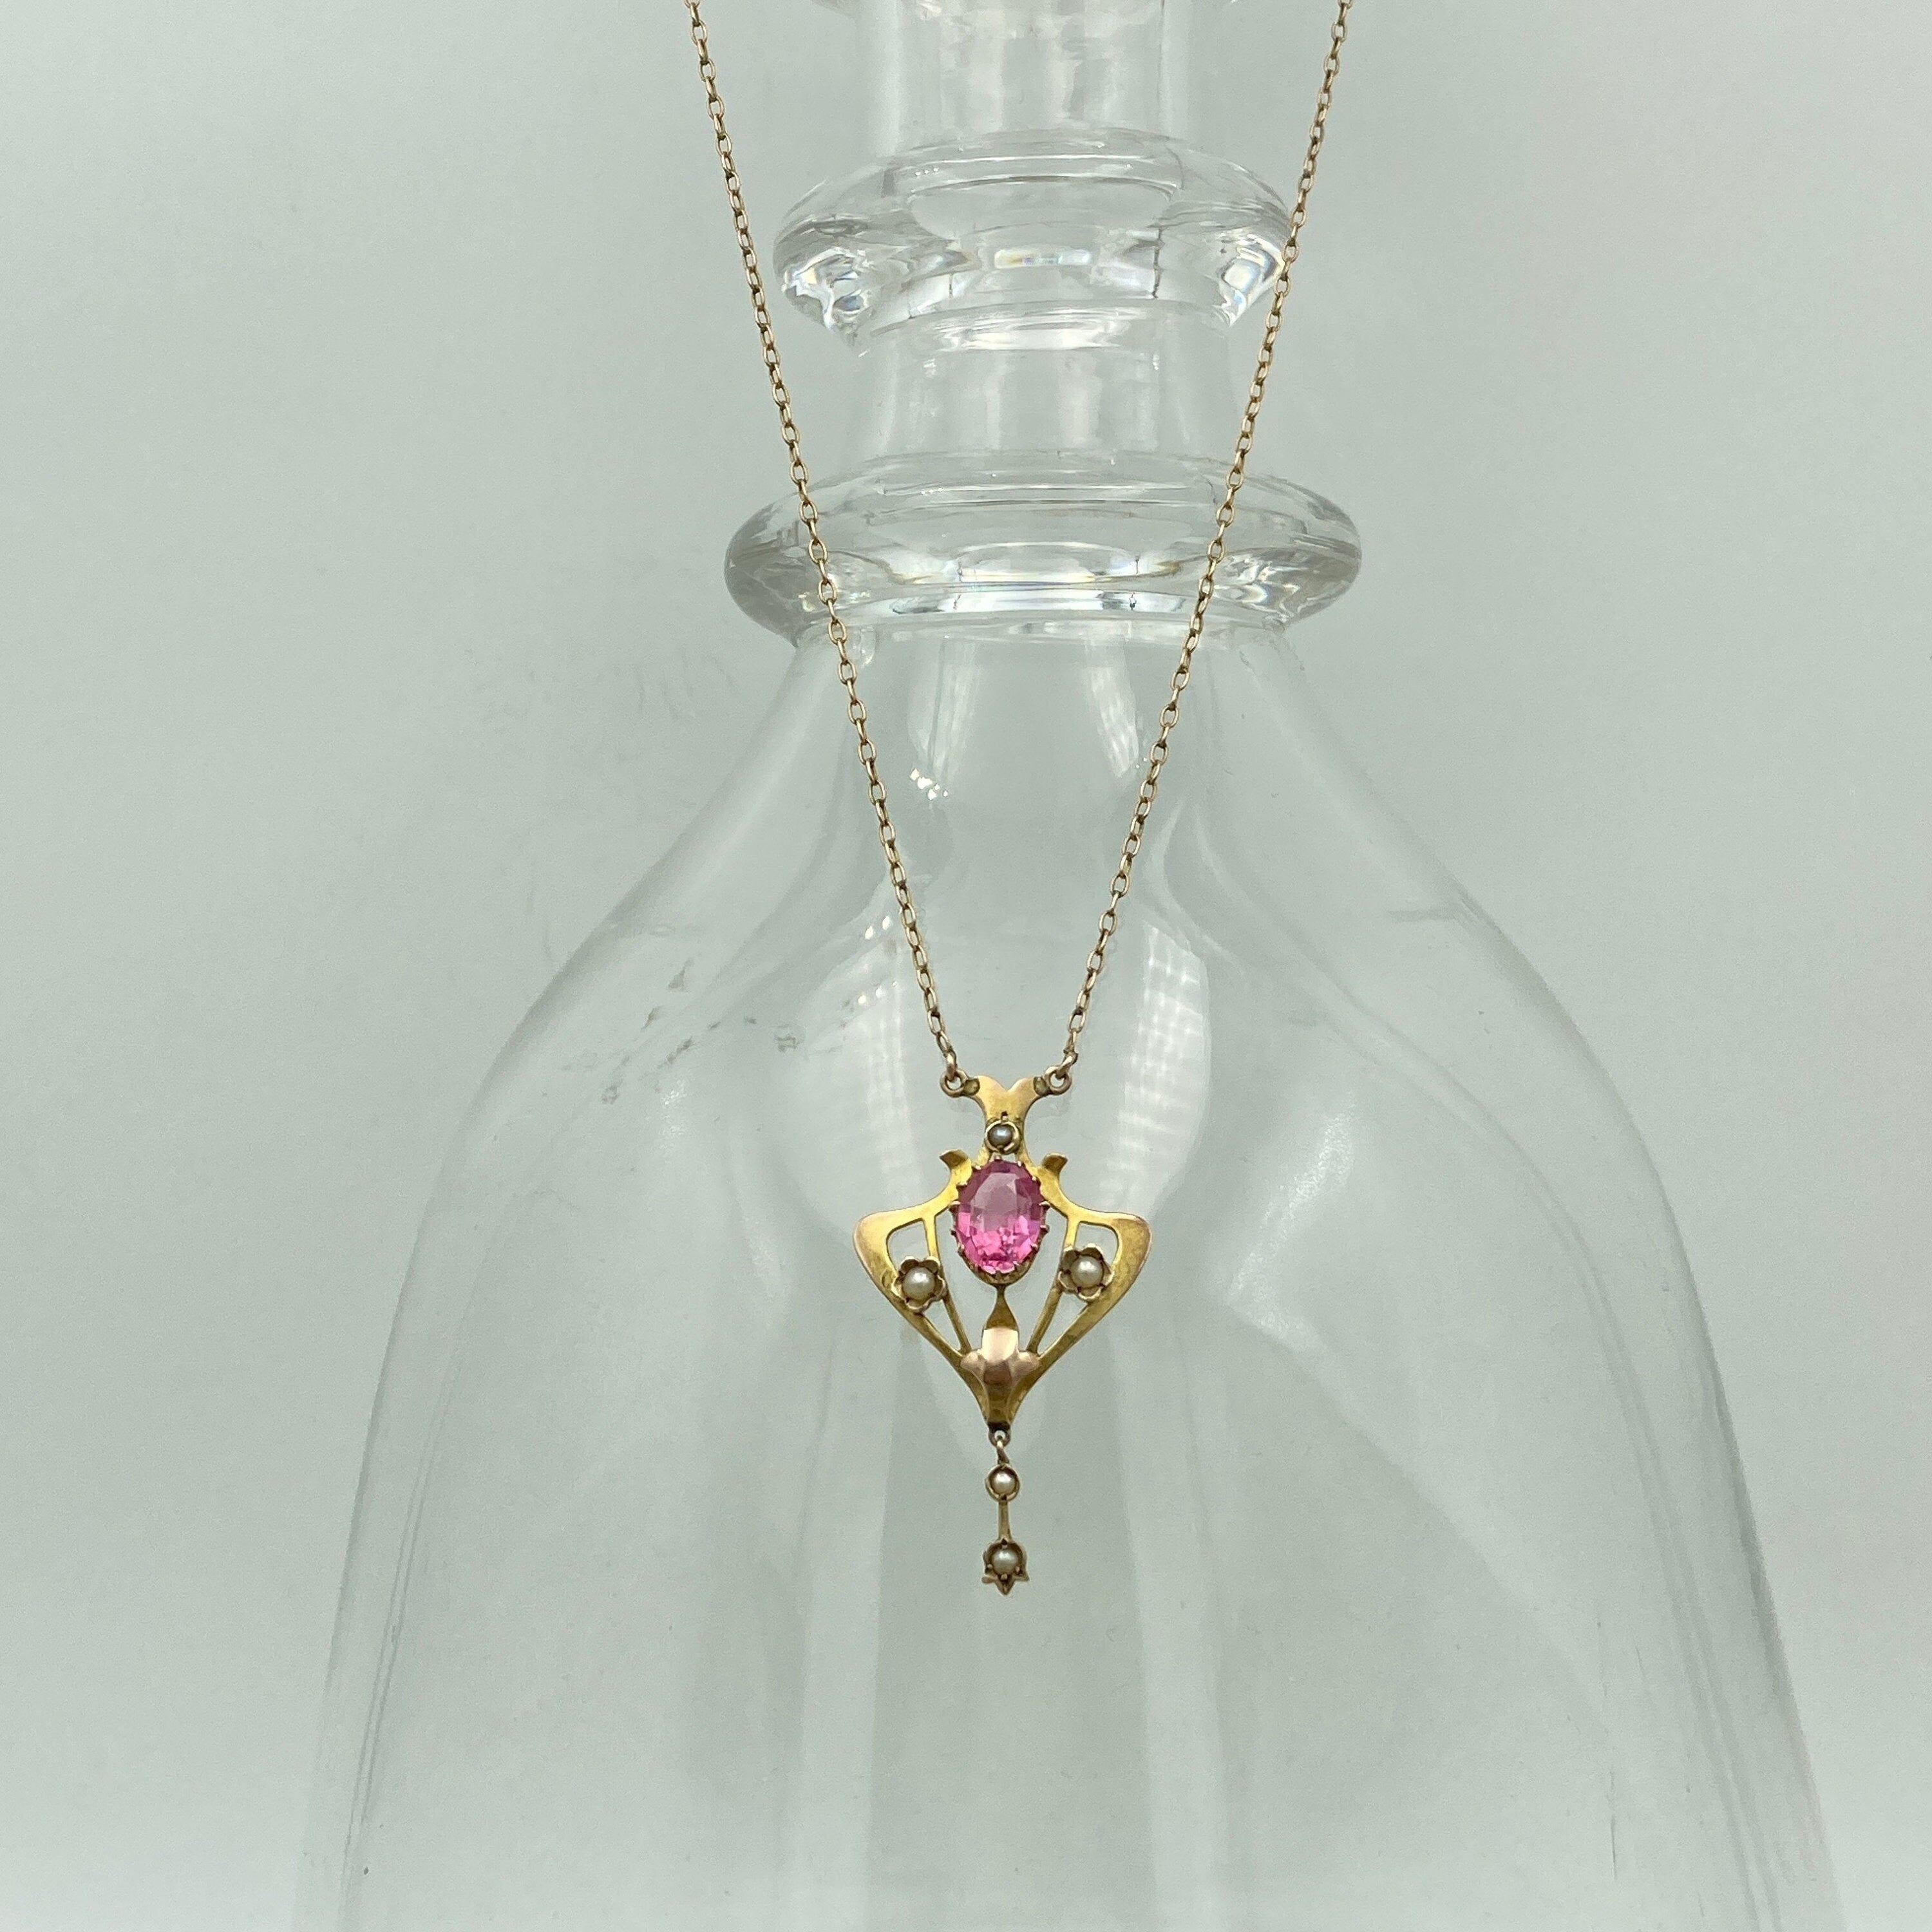 Edwardian 9ct gold pink tourmaline & seed pearl pendant necklace-  9ct gold trace link chain, barrel clasp